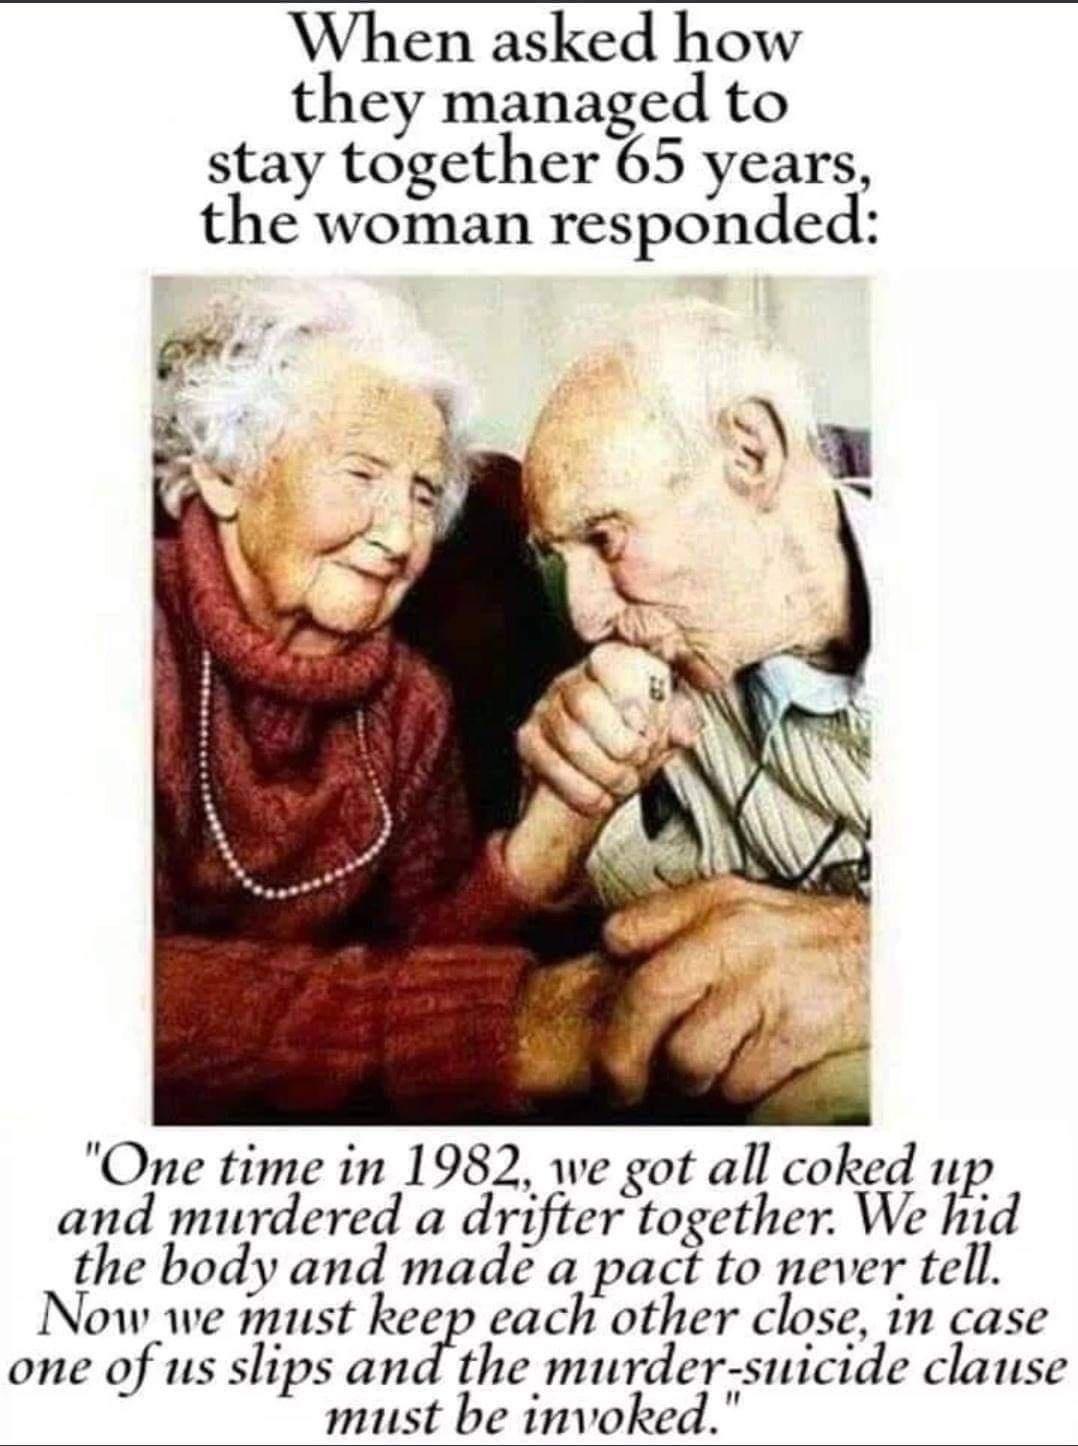 relationship goals in one - When asked how they managed to stay together 65 years, the woman responded "One time in 1982, we got all coked up. and murdered a drifter together. We hid the body and made a pact to never tell. Now we must keep each other clos